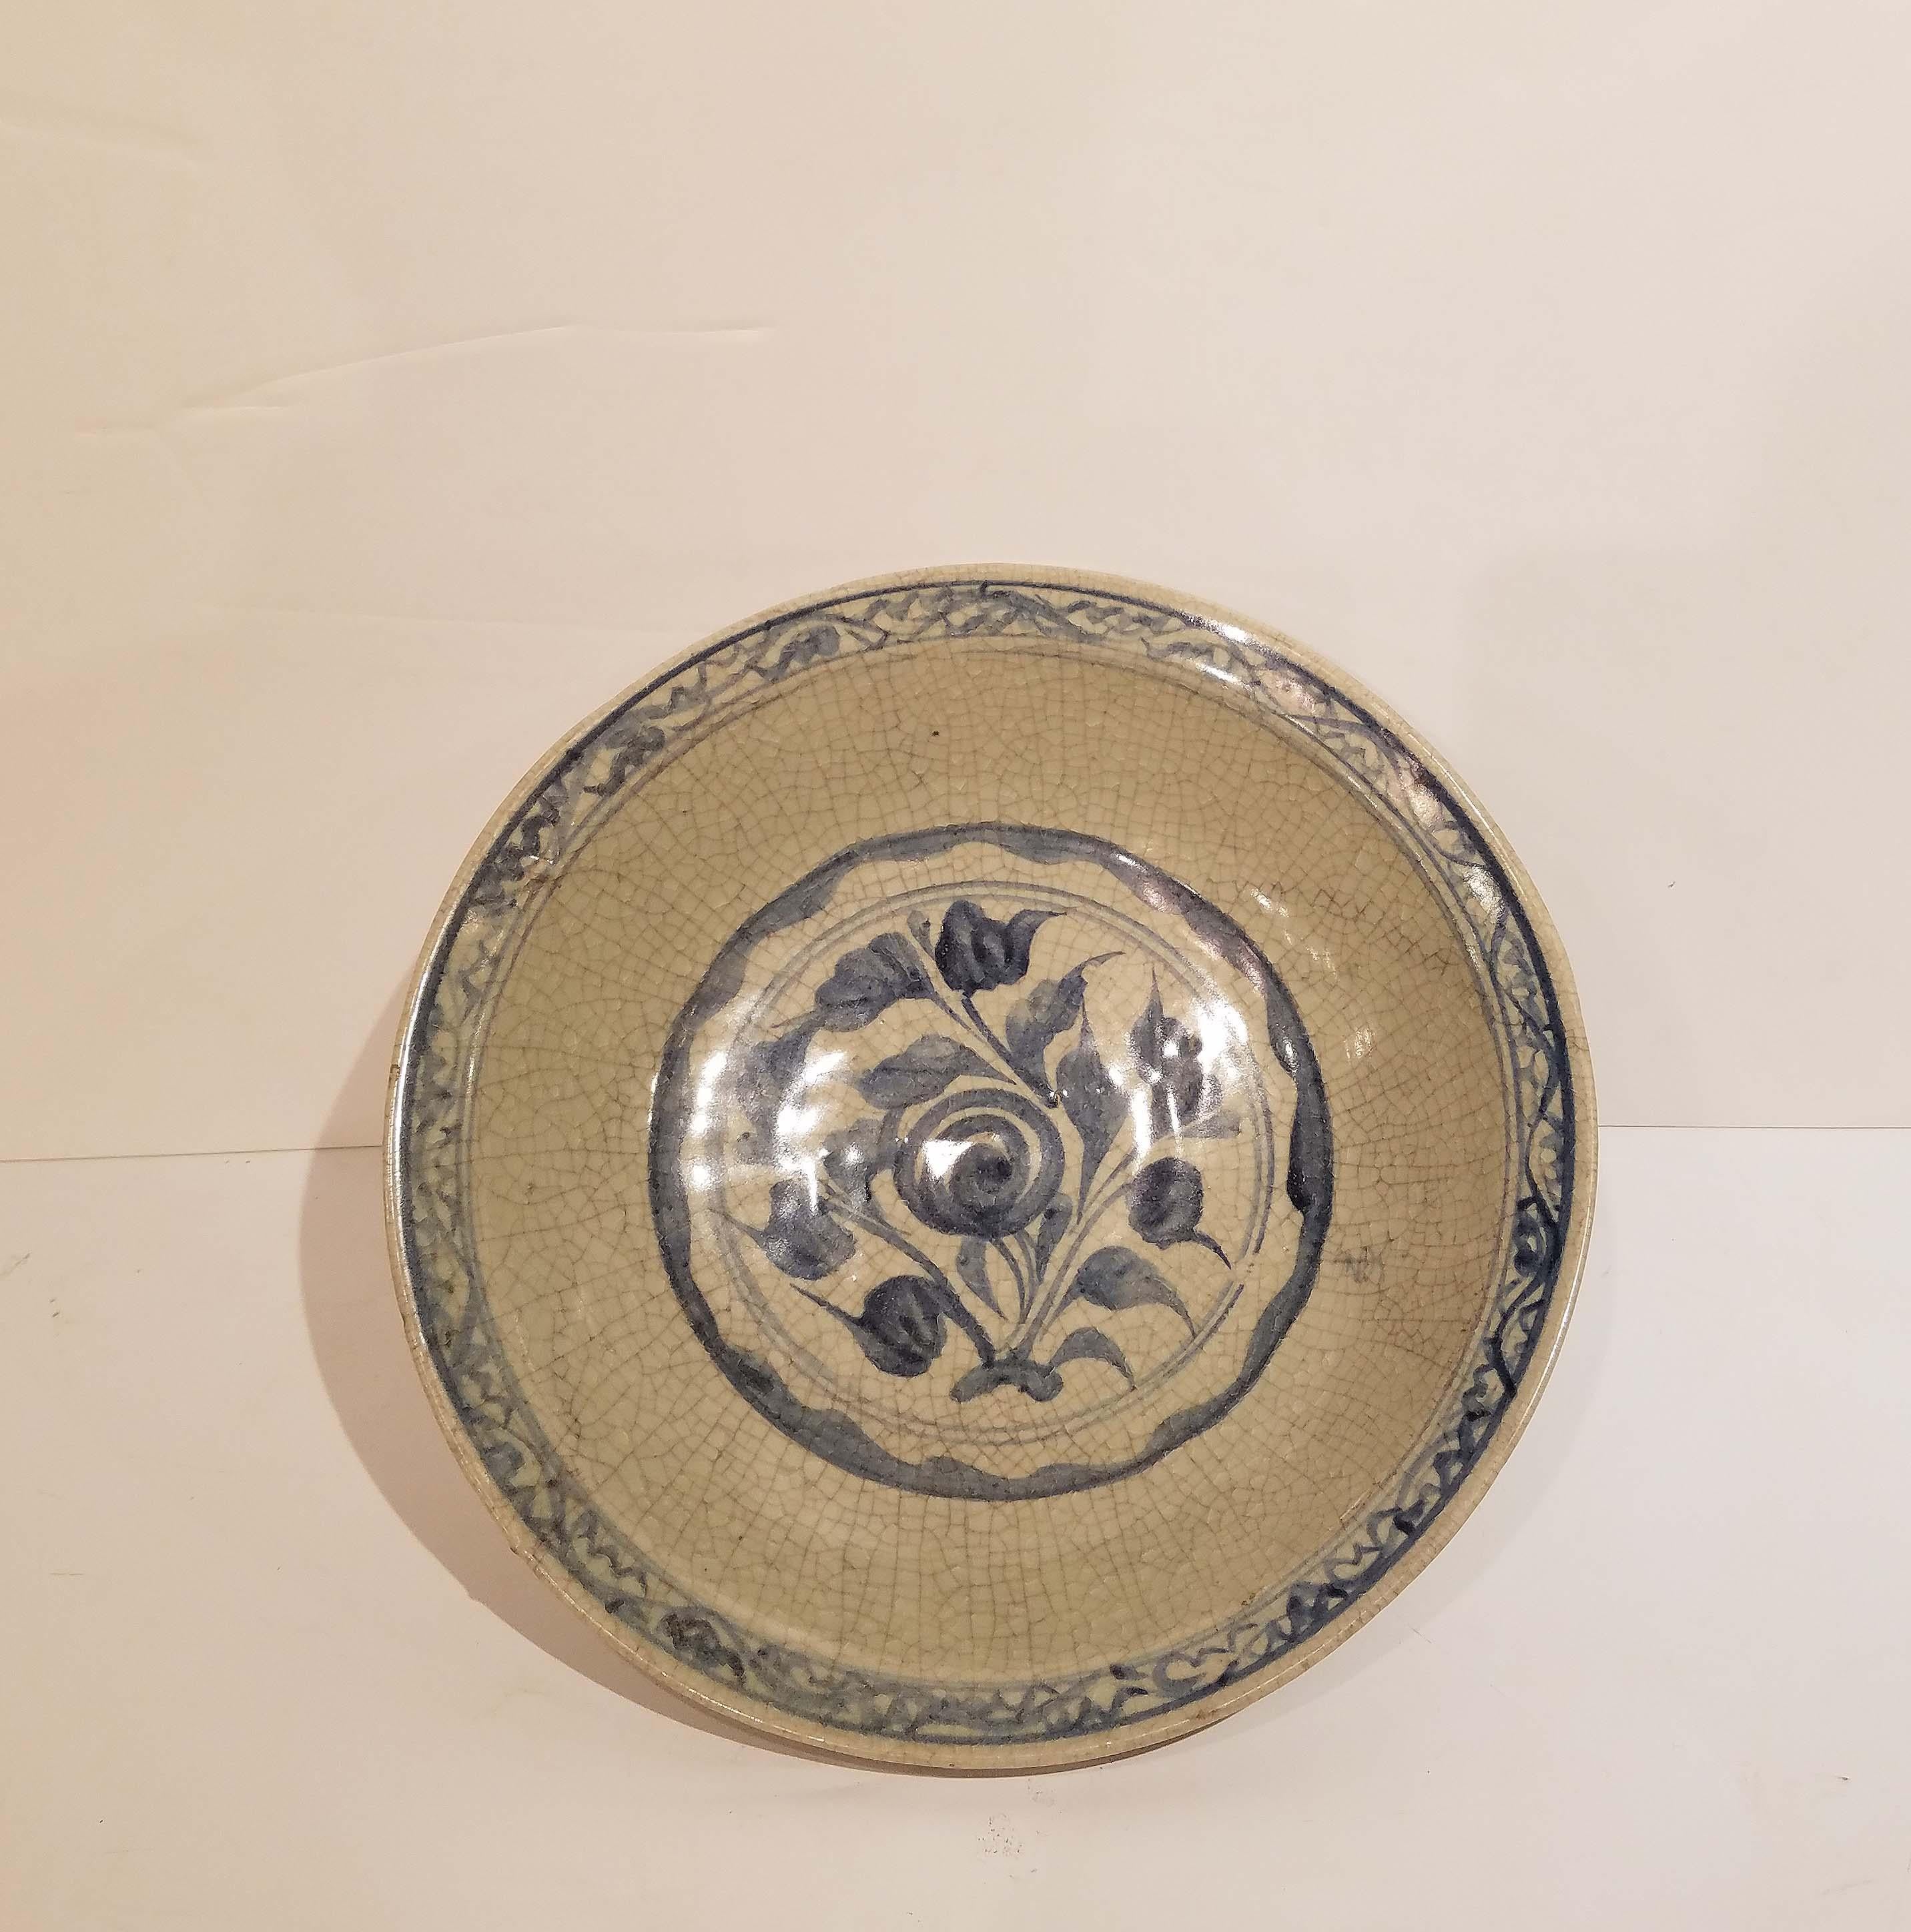 Ming dynasty Chinese Porcelain celadon bowl. Purchased from a NYC collector. Measures: 12.5 inches wide and 3 inches high. The shape was compromised in making so it’s not even all around.